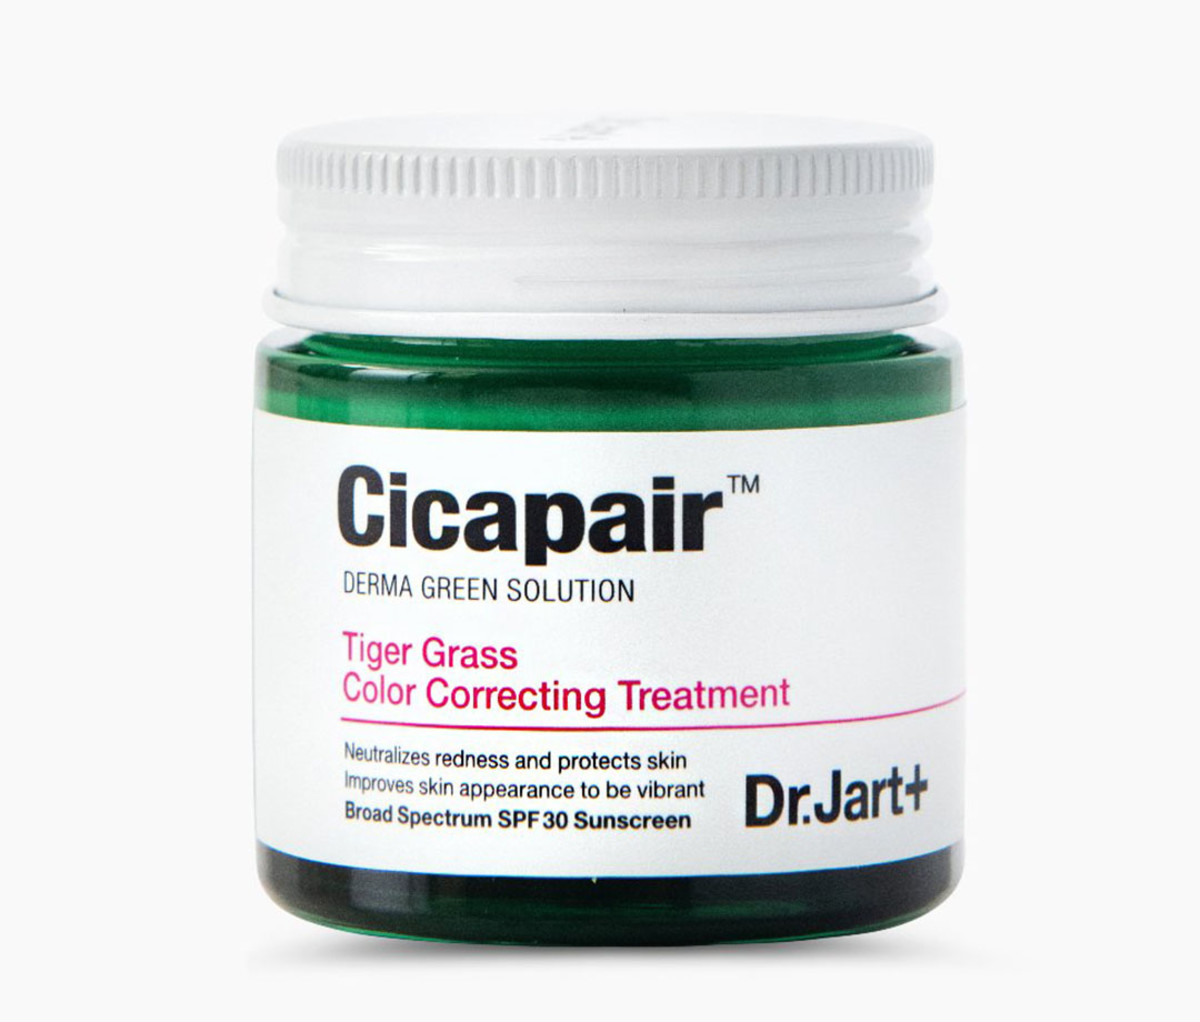 Cicapair Color-Correcting Treatment SPF 30 from Dr.Jart+